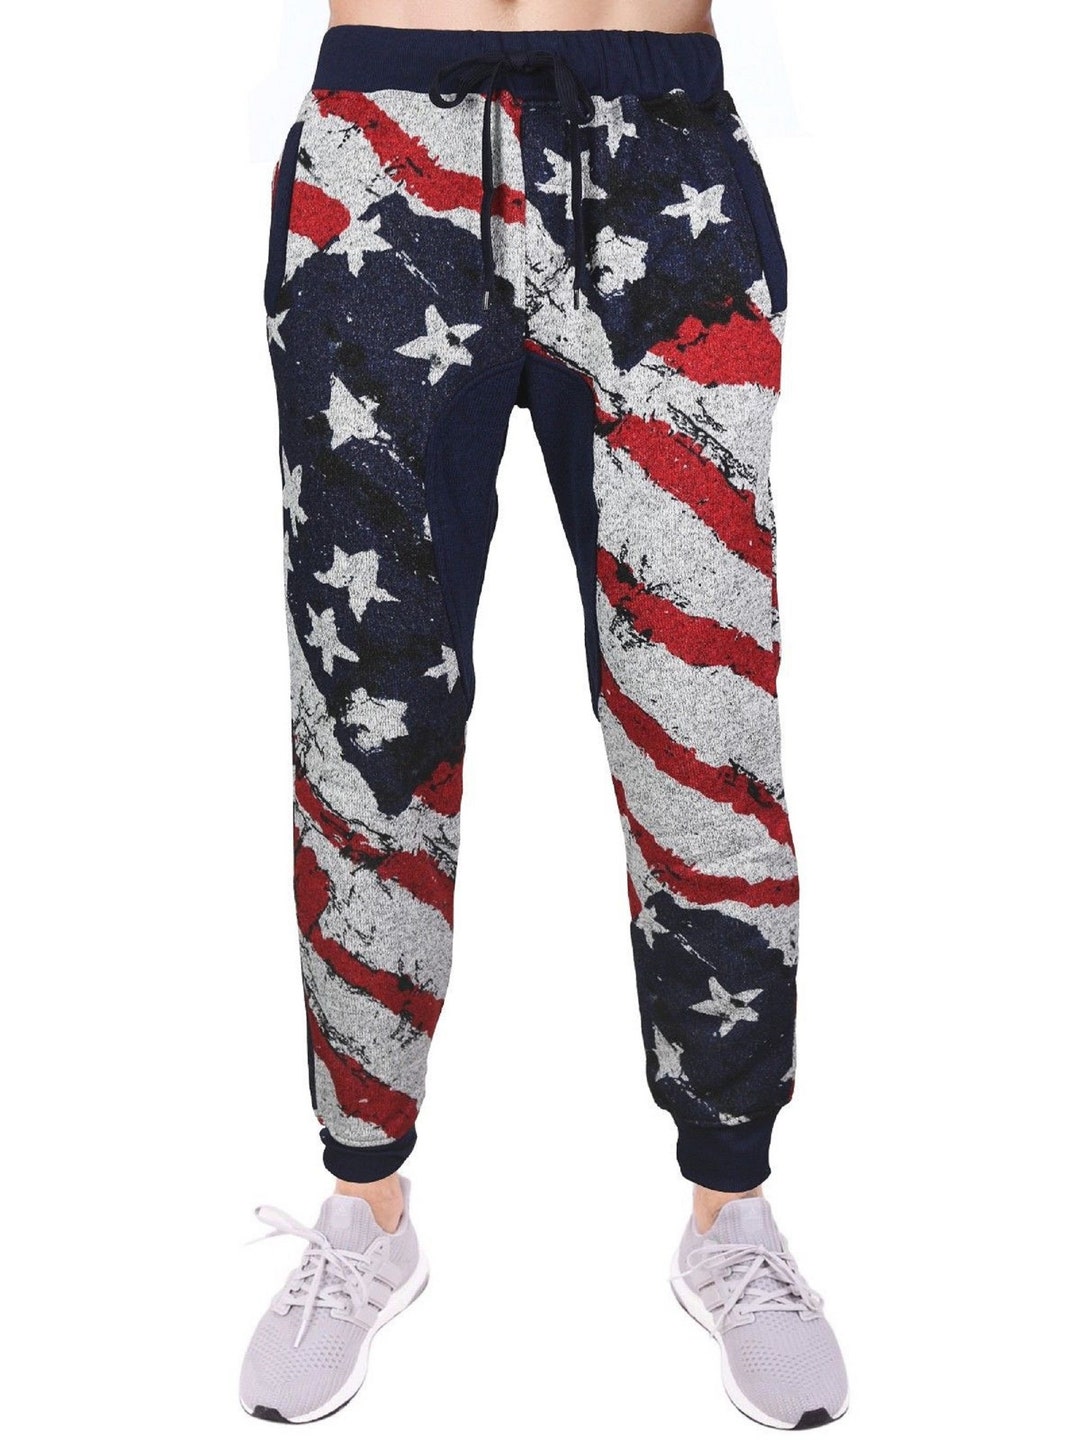 New, Sweat Pants USA Flag Color Navy Blue Adult Size Made in Korea - Etsy